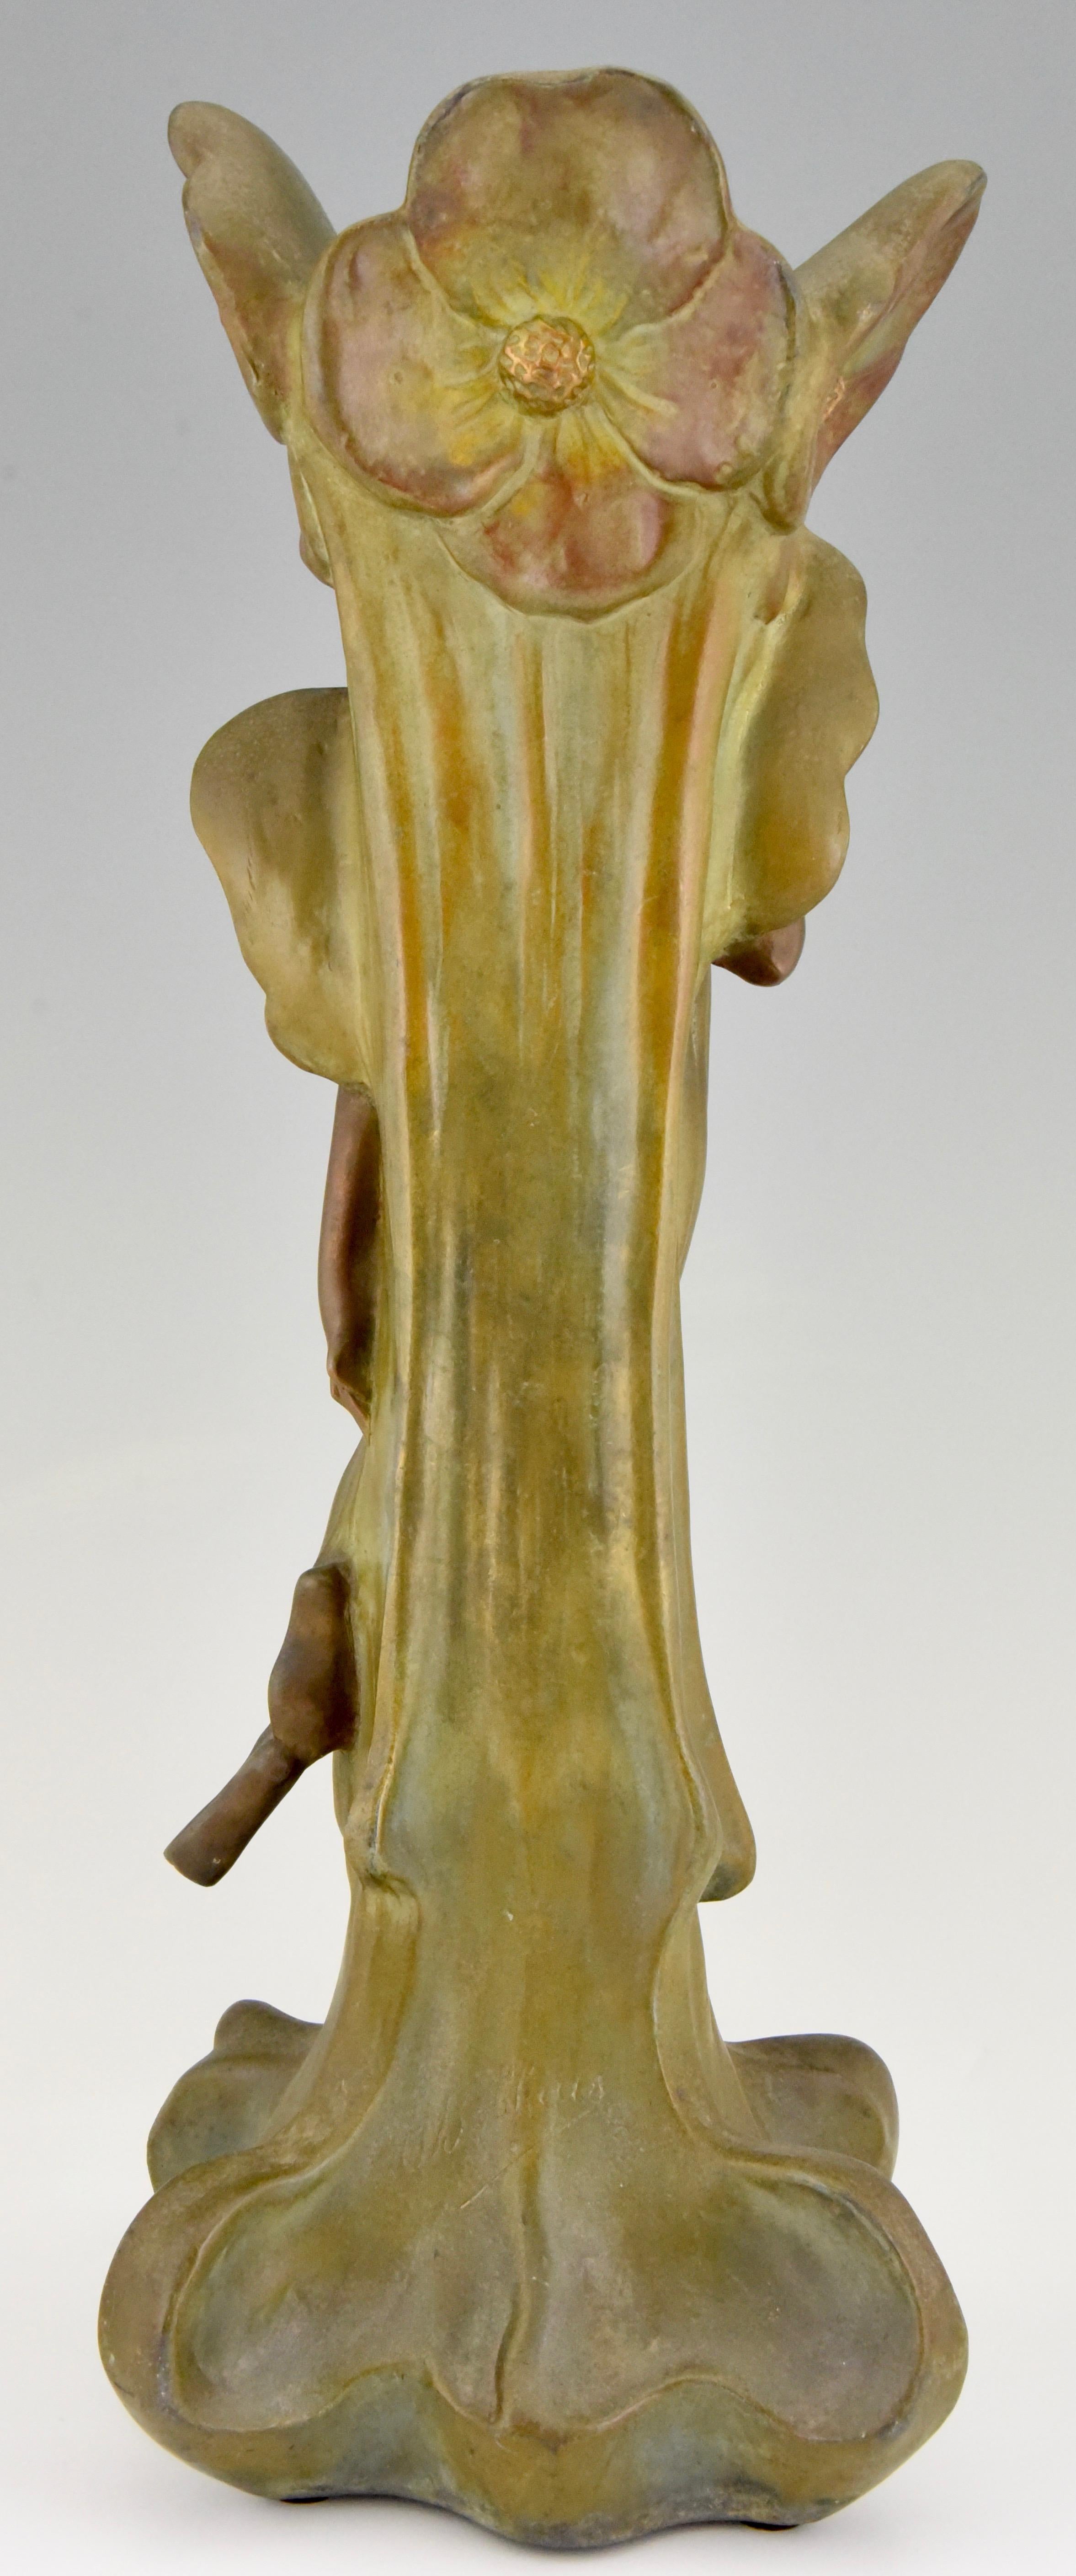 Patinated Art Nouveau Vase with Butterfly Lady and Flowers Bobbias, France, 1900